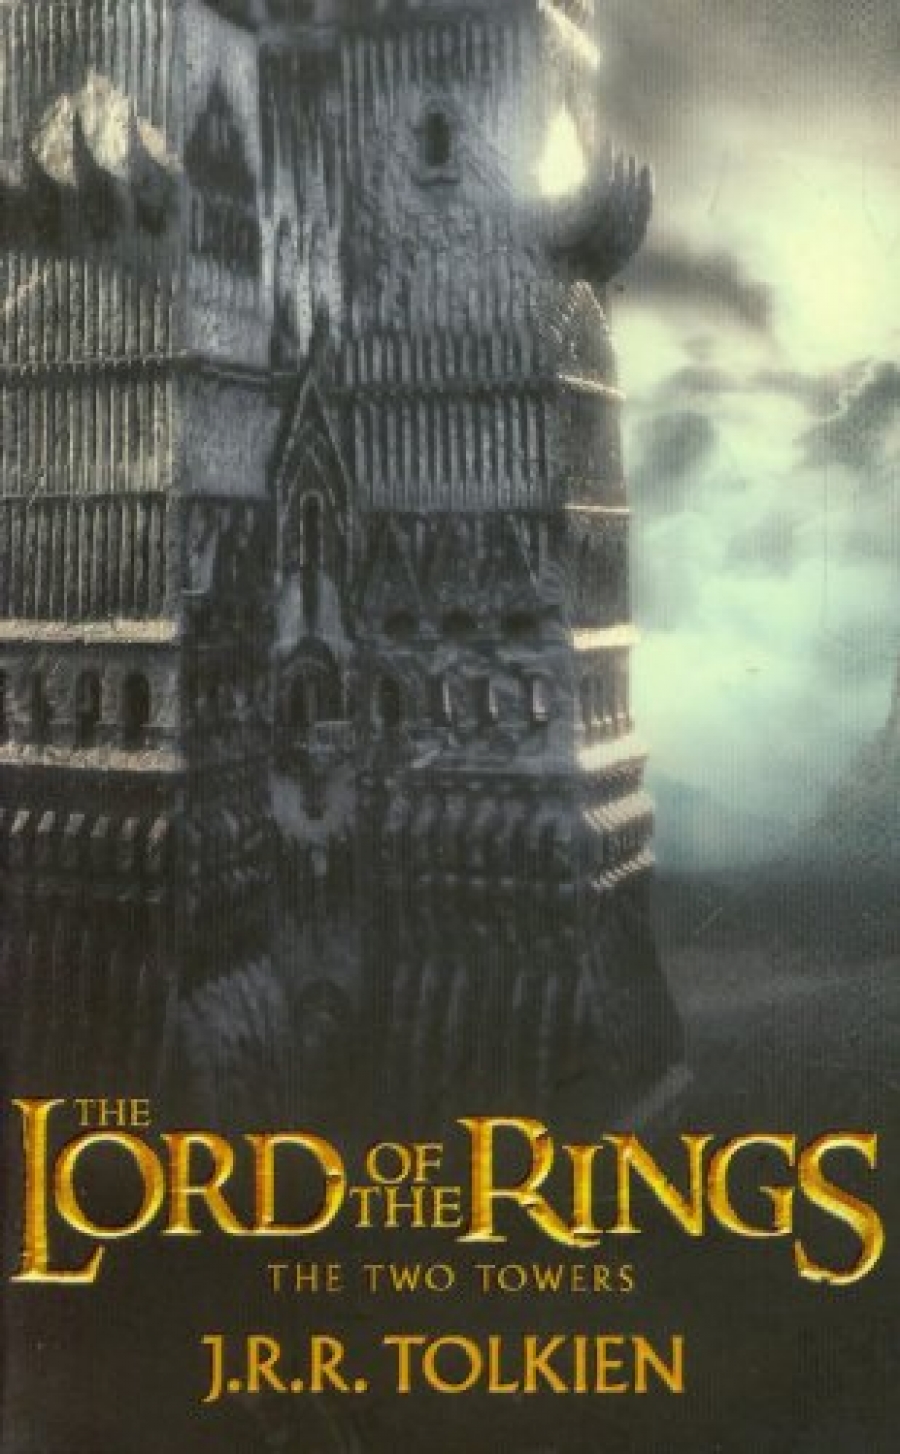 Tolkien, J.R.R. The Two Towers. Being the second part of The Lord of the Rings 